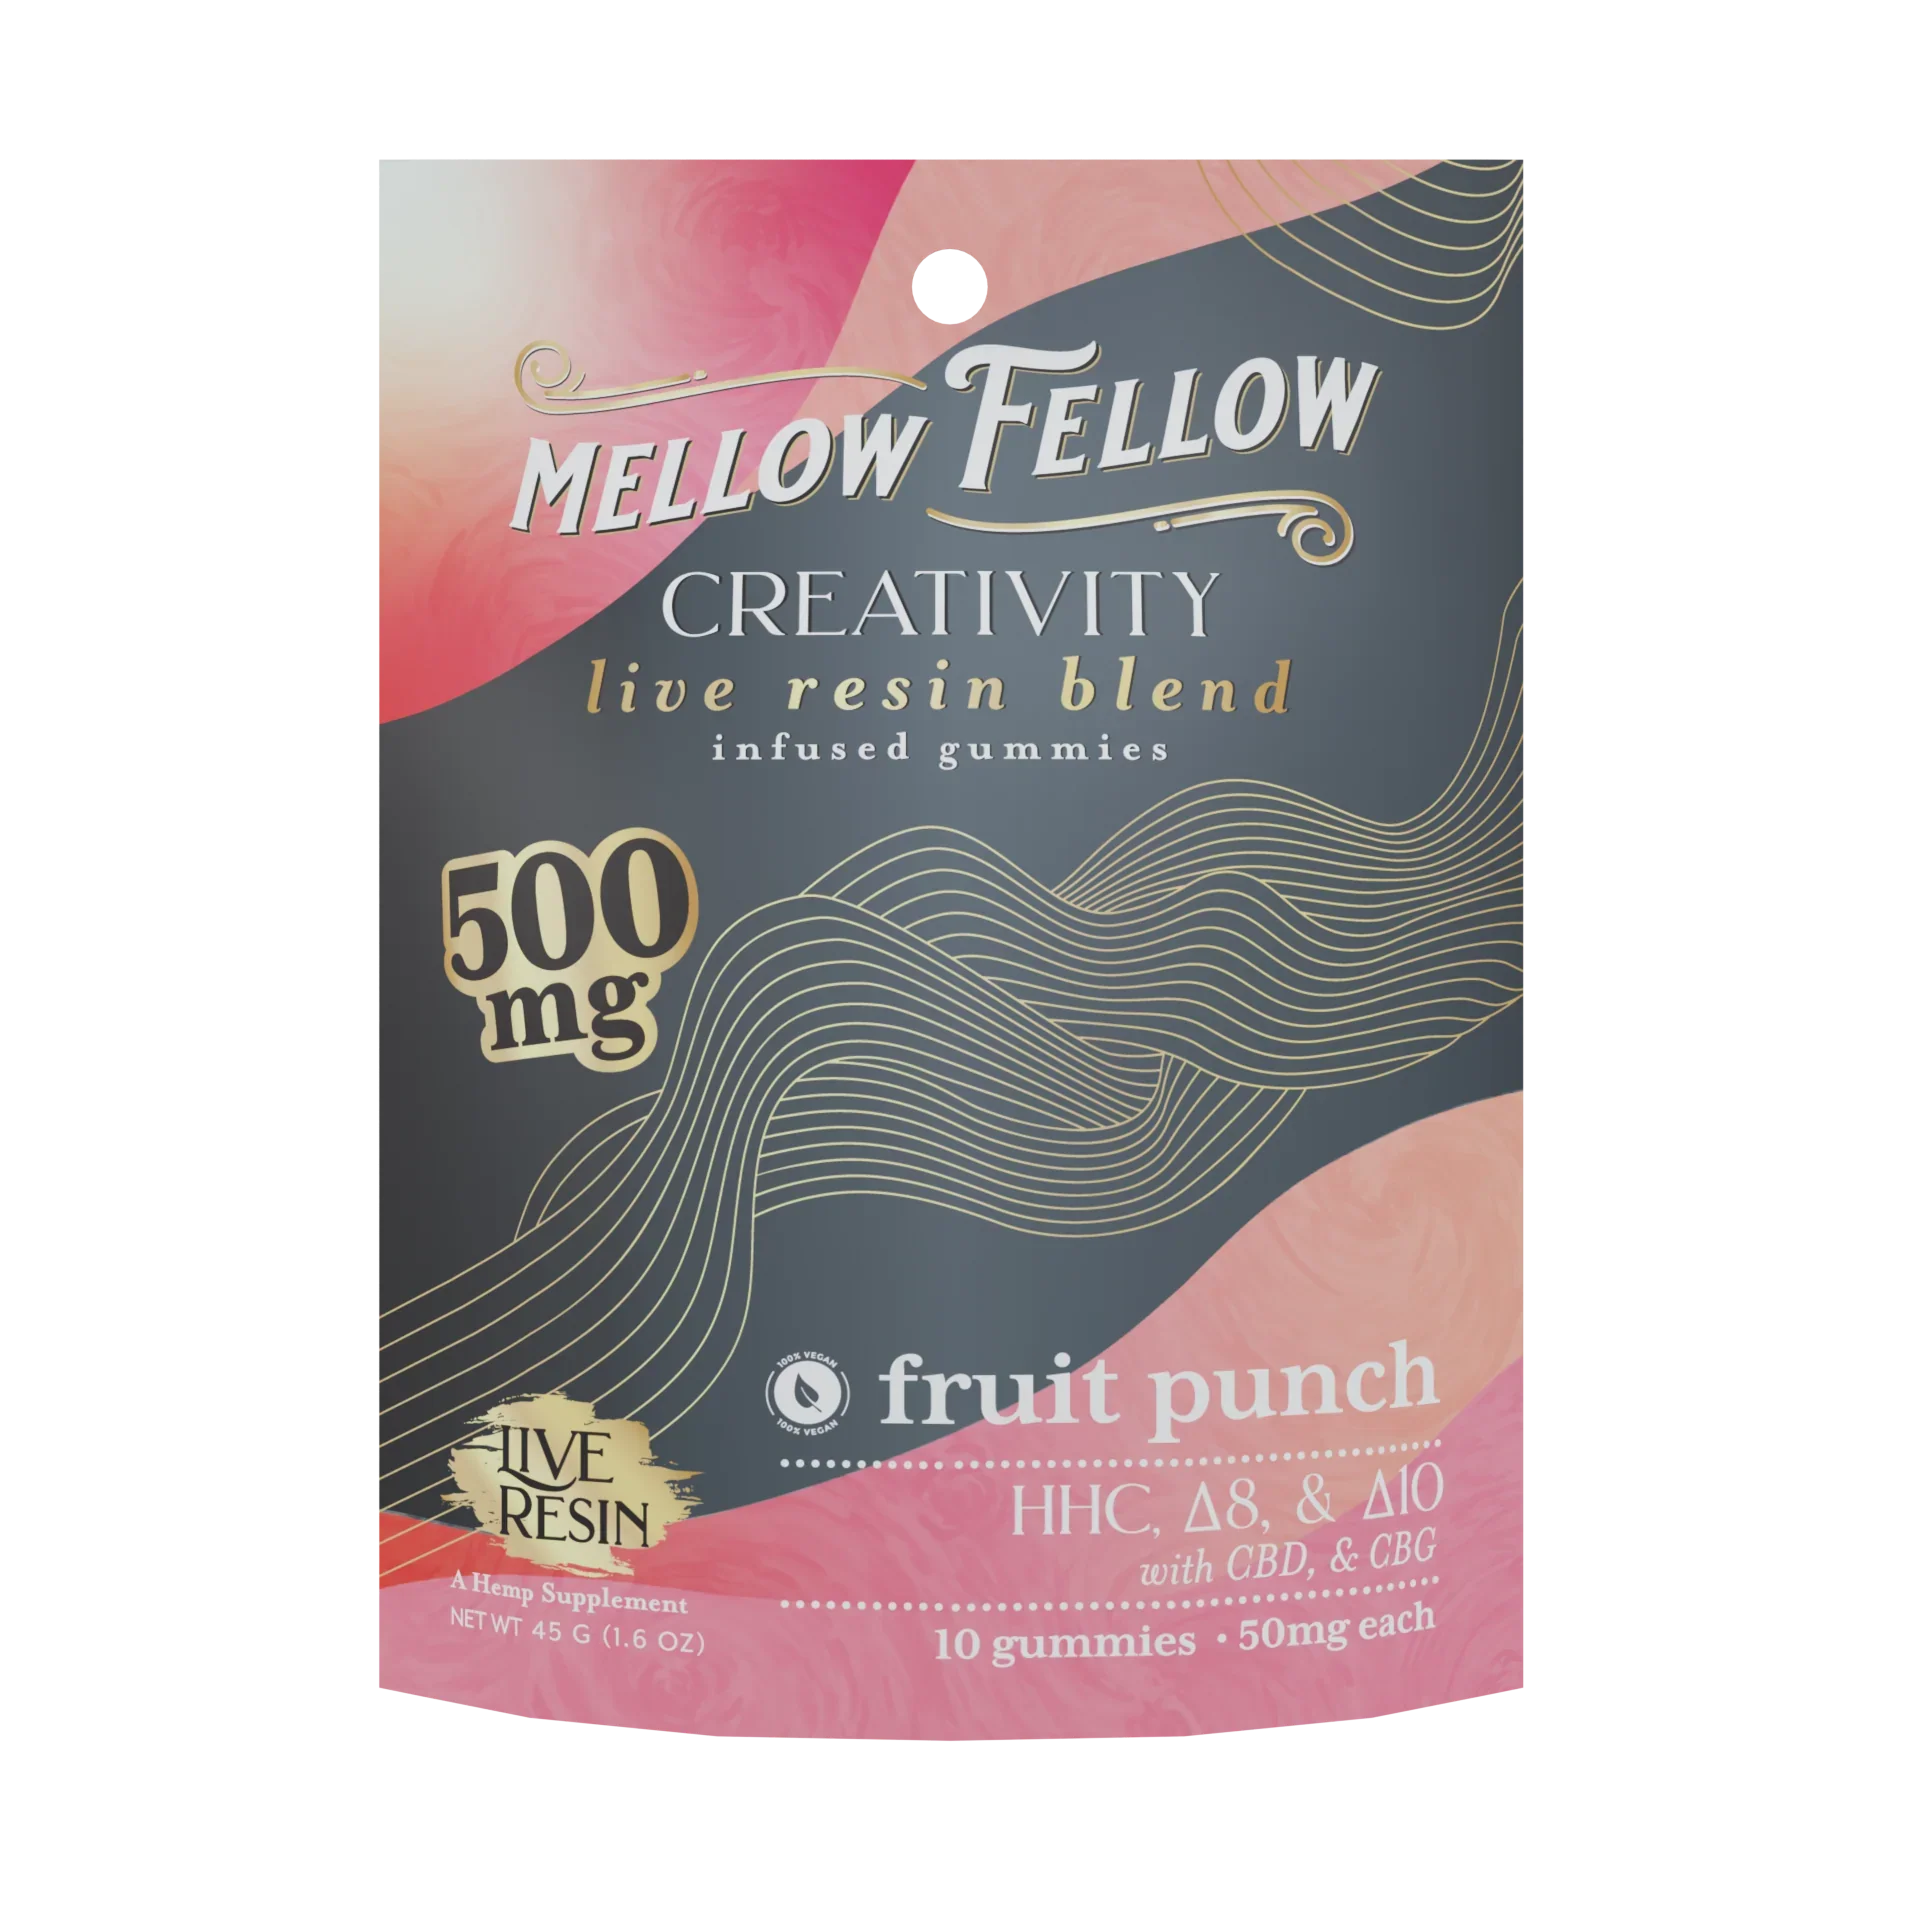 Mellow Fellow Creativity Blend Live Resin M-Fusions Edibles Fruit Punch 500mg Best Price